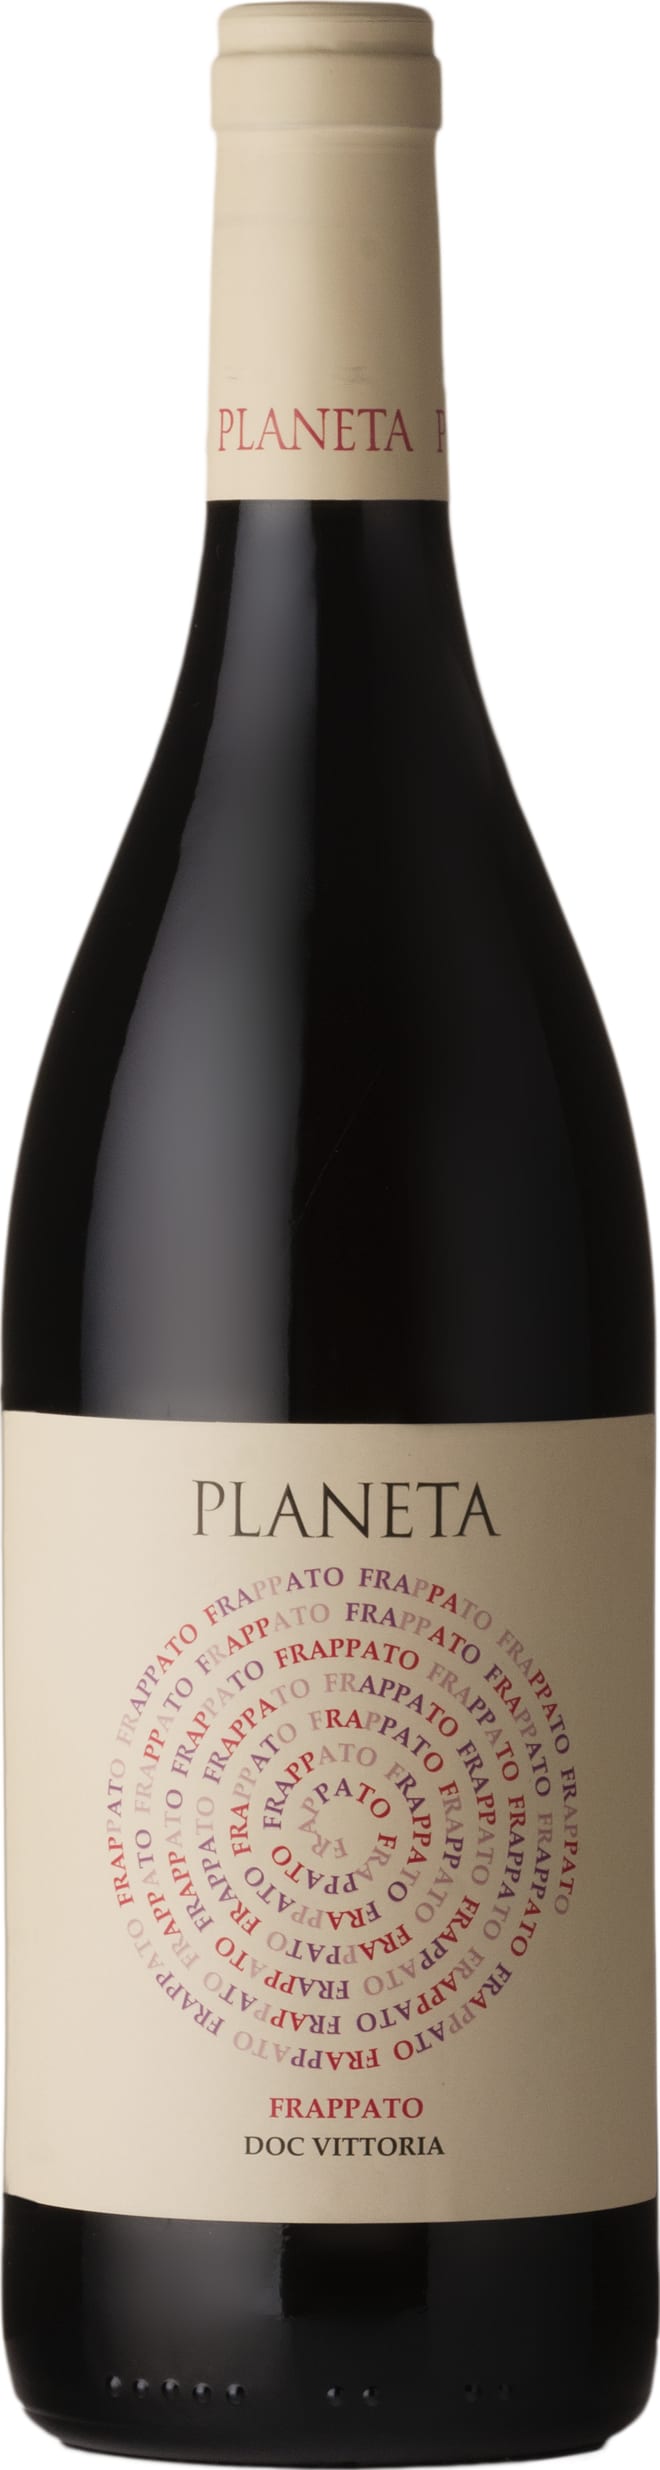 Planeta Frappato Vittoria DOC 2022 75cl - Buy Planeta Wines from GREAT WINES DIRECT wine shop